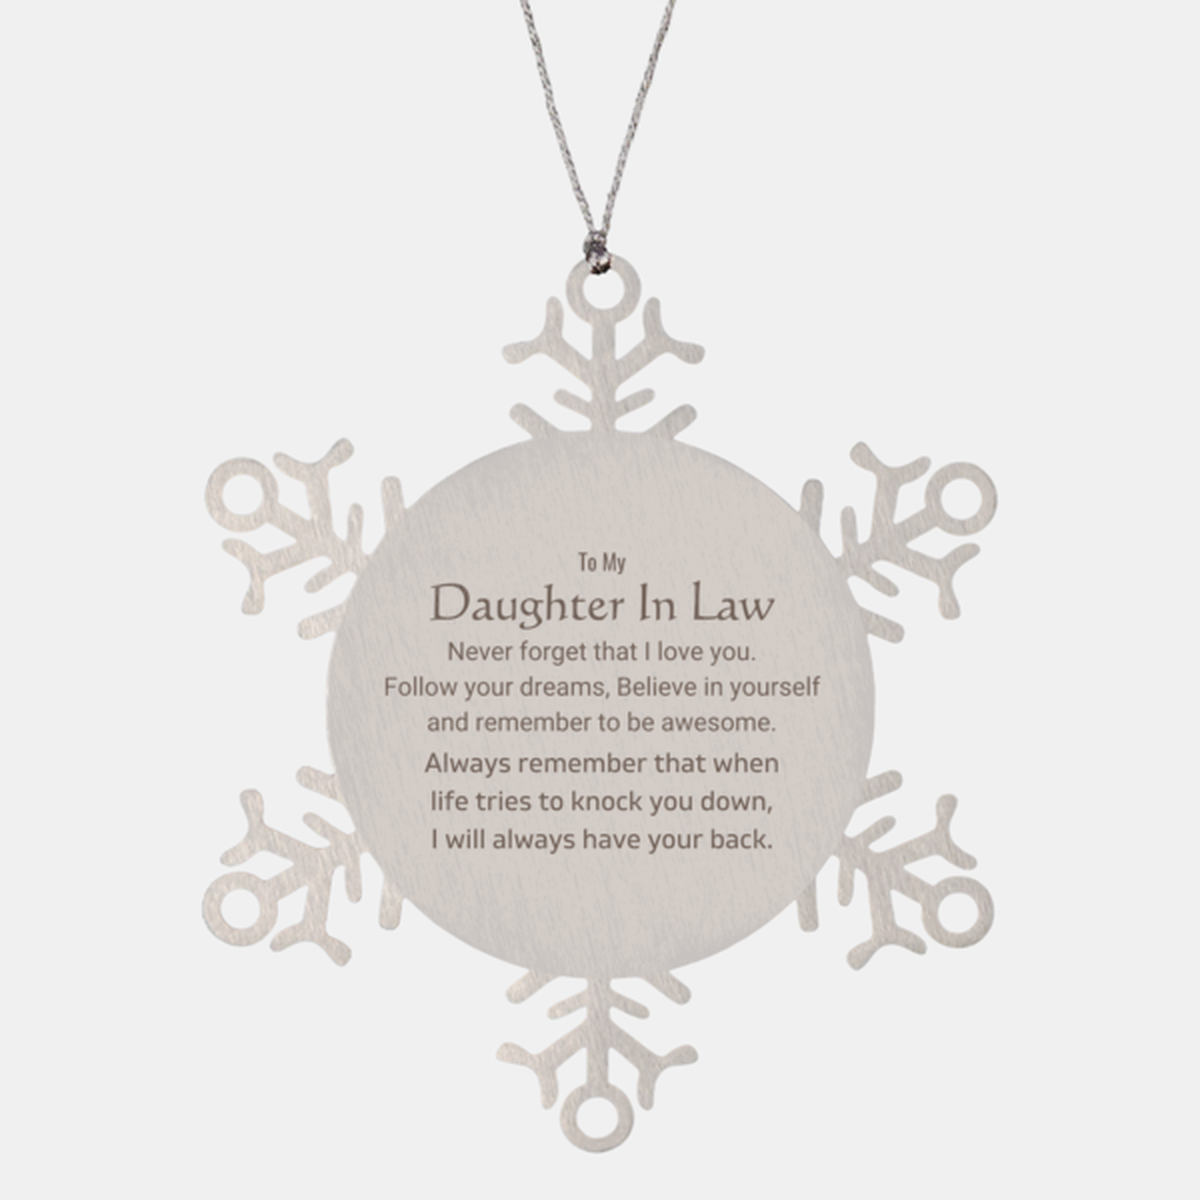 Inspirational Gifts for Daughter In Law, Follow your dreams, Believe in yourself, Daughter In Law Snowflake Ornament, Birthday Christmas Unique Gifts For Daughter In Law